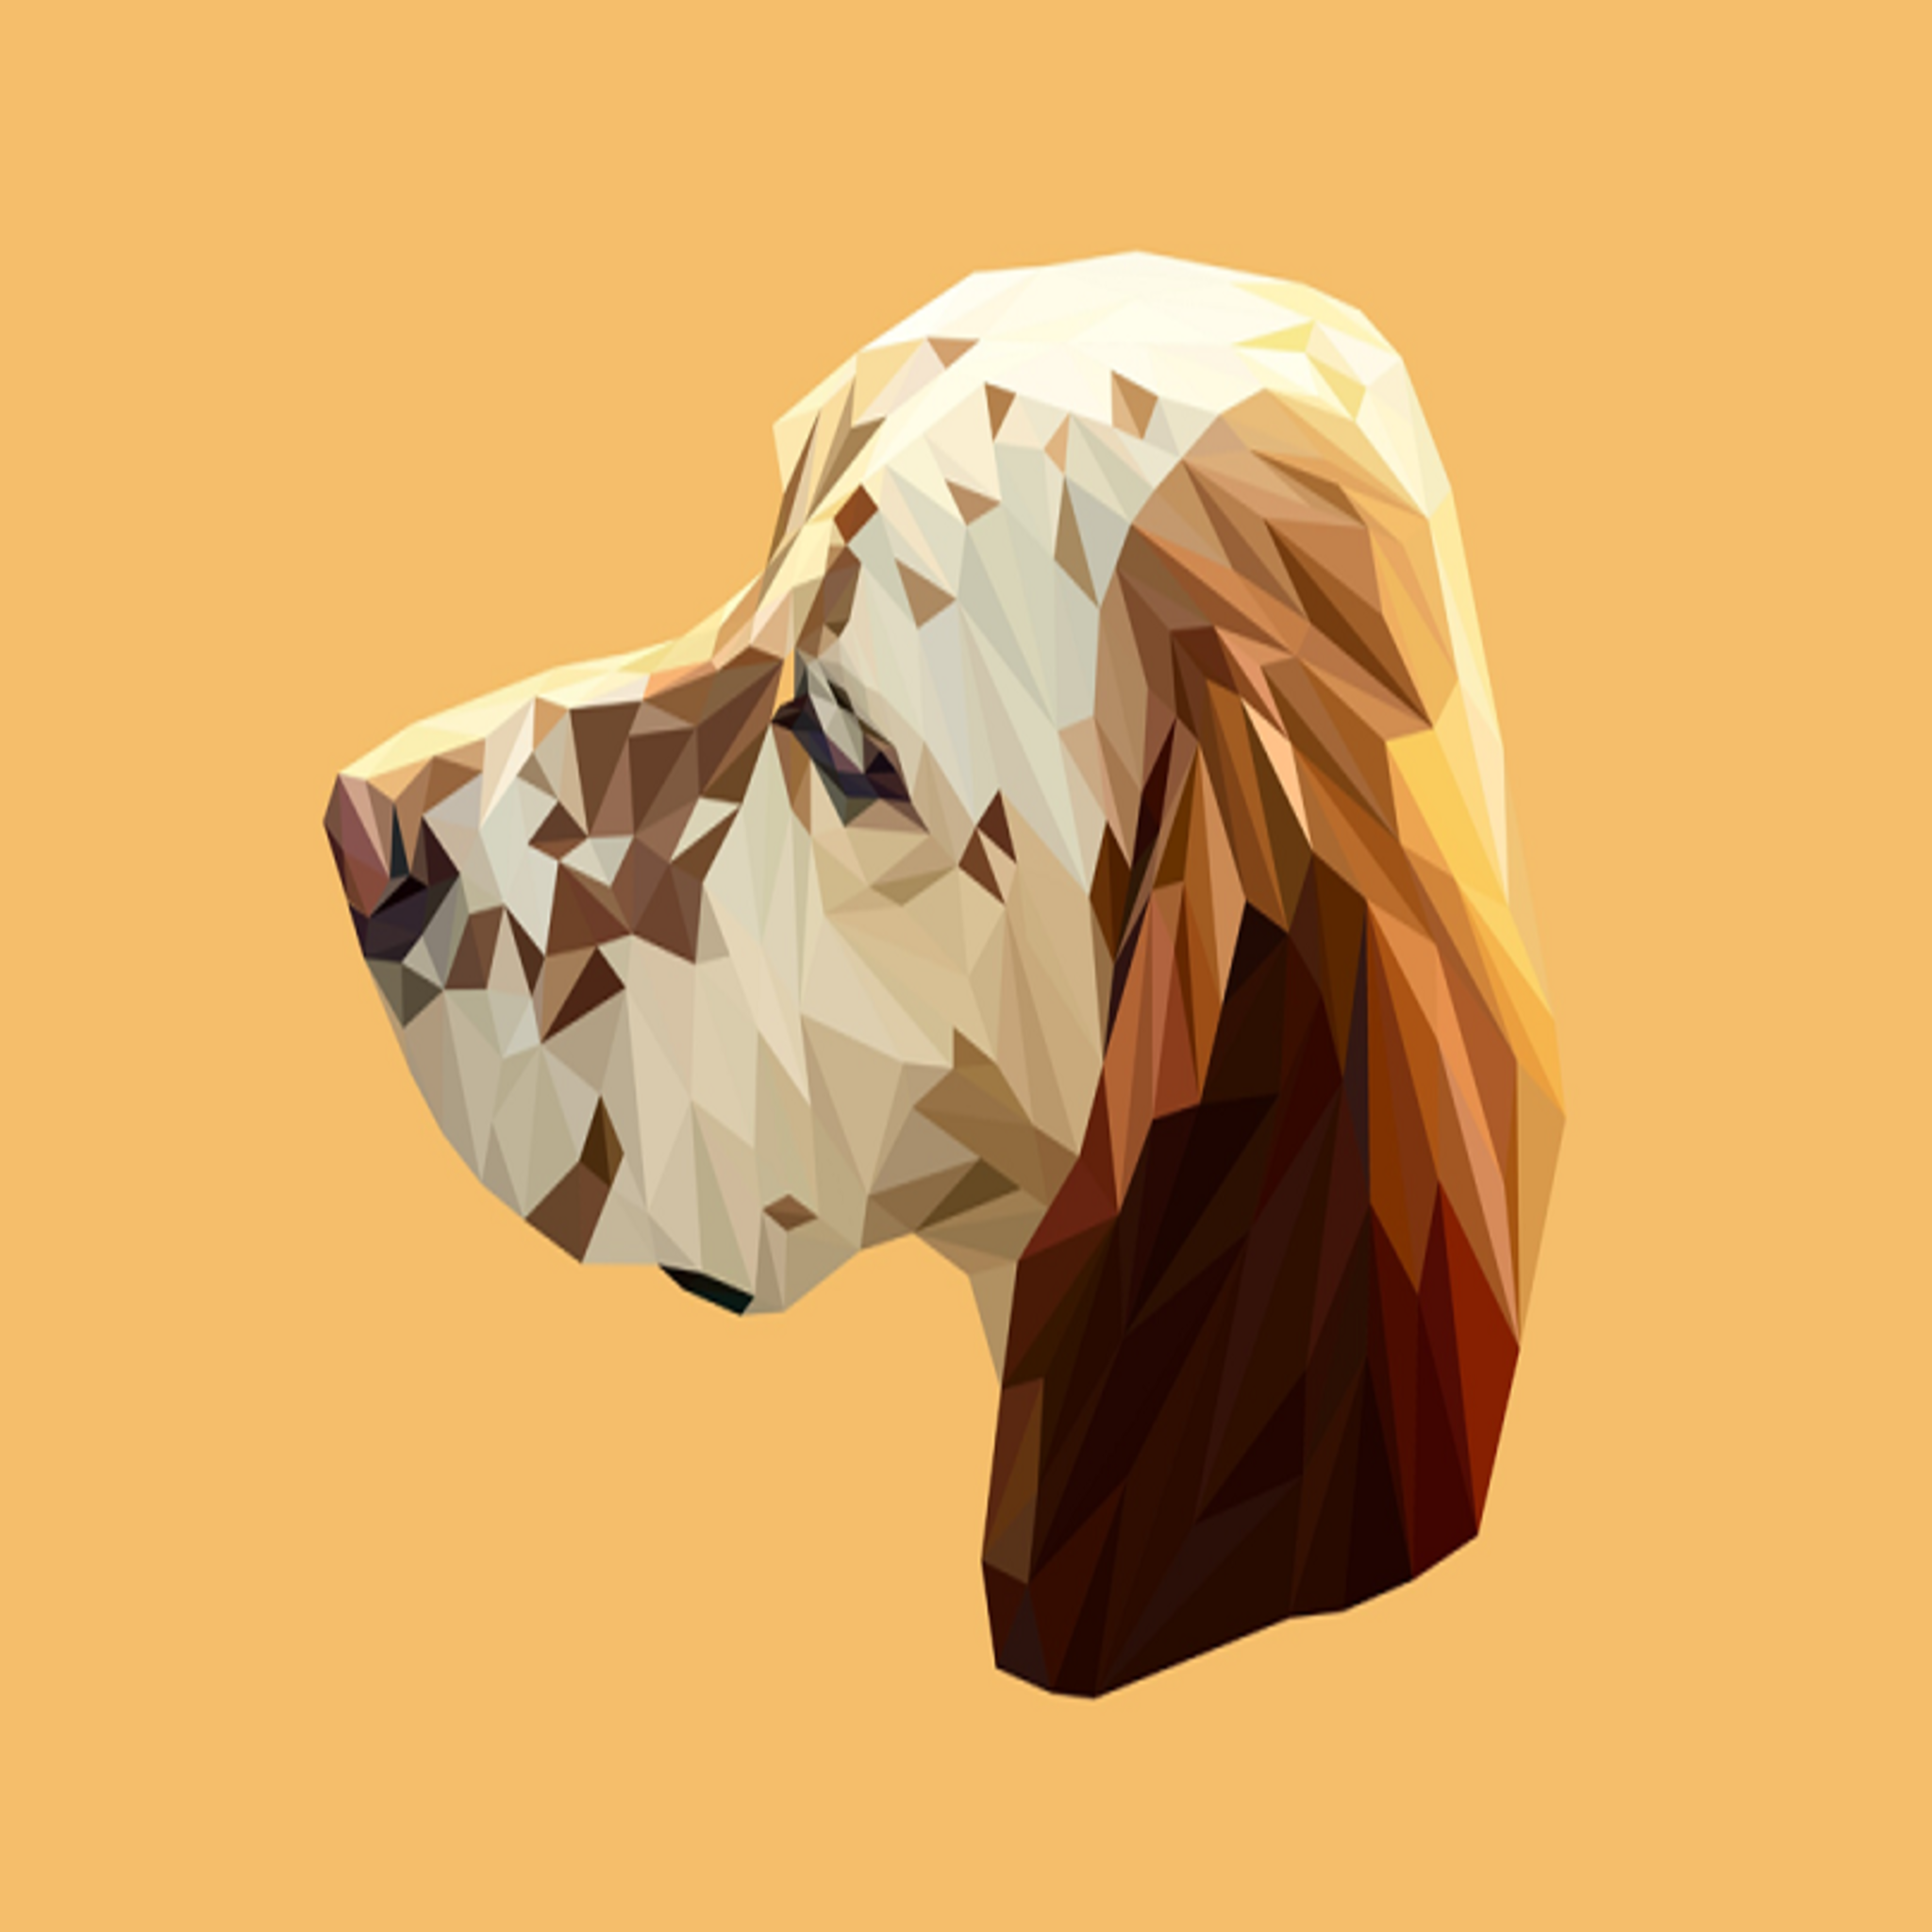 How To Create A Low Poly Portrait With The Pen Tool